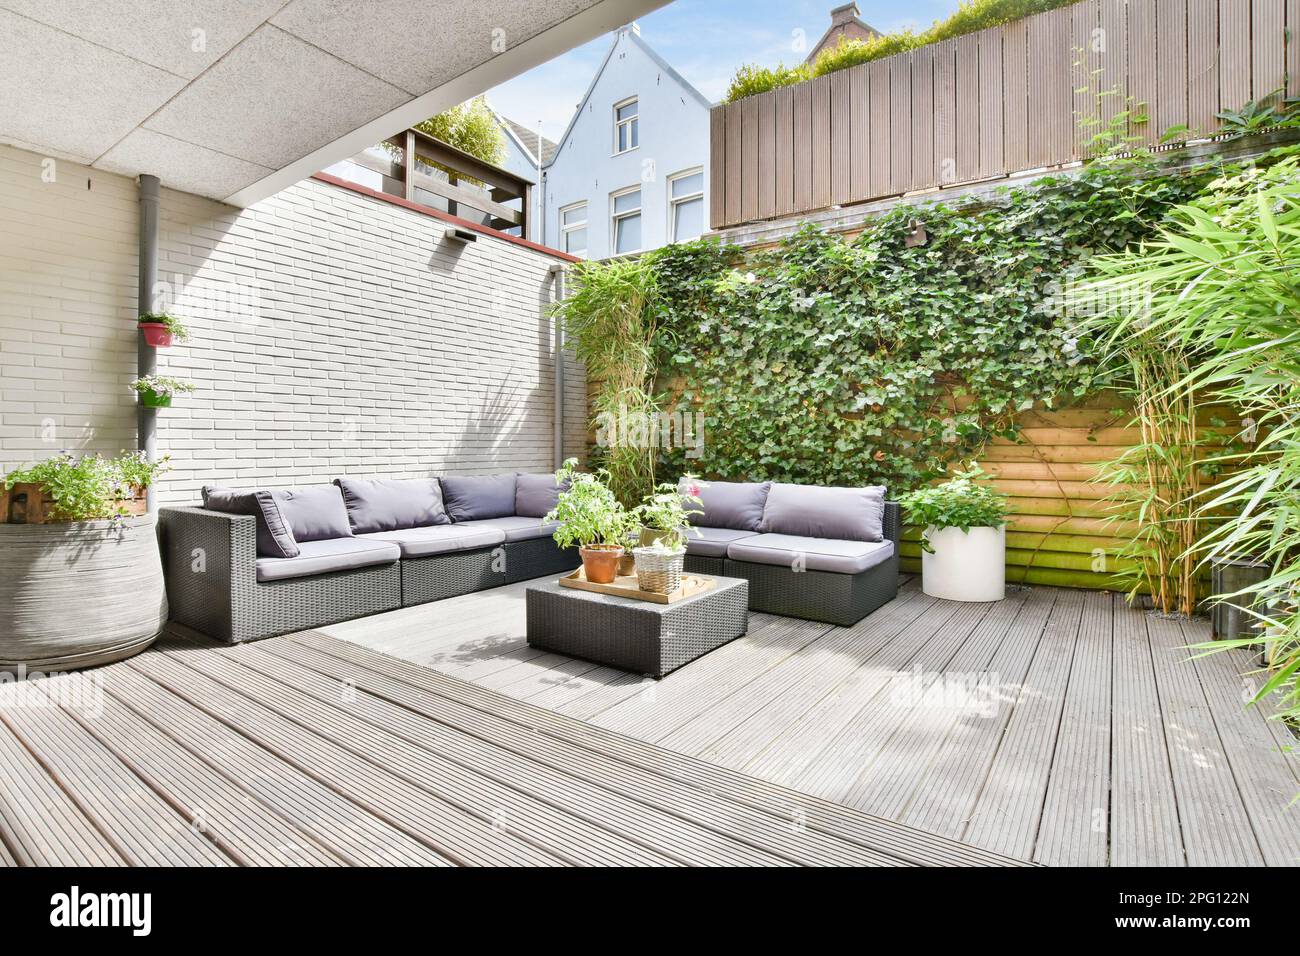 an outdoor living area with wood flooring and plants on the wall, including potted planters and sofas Stock Photo